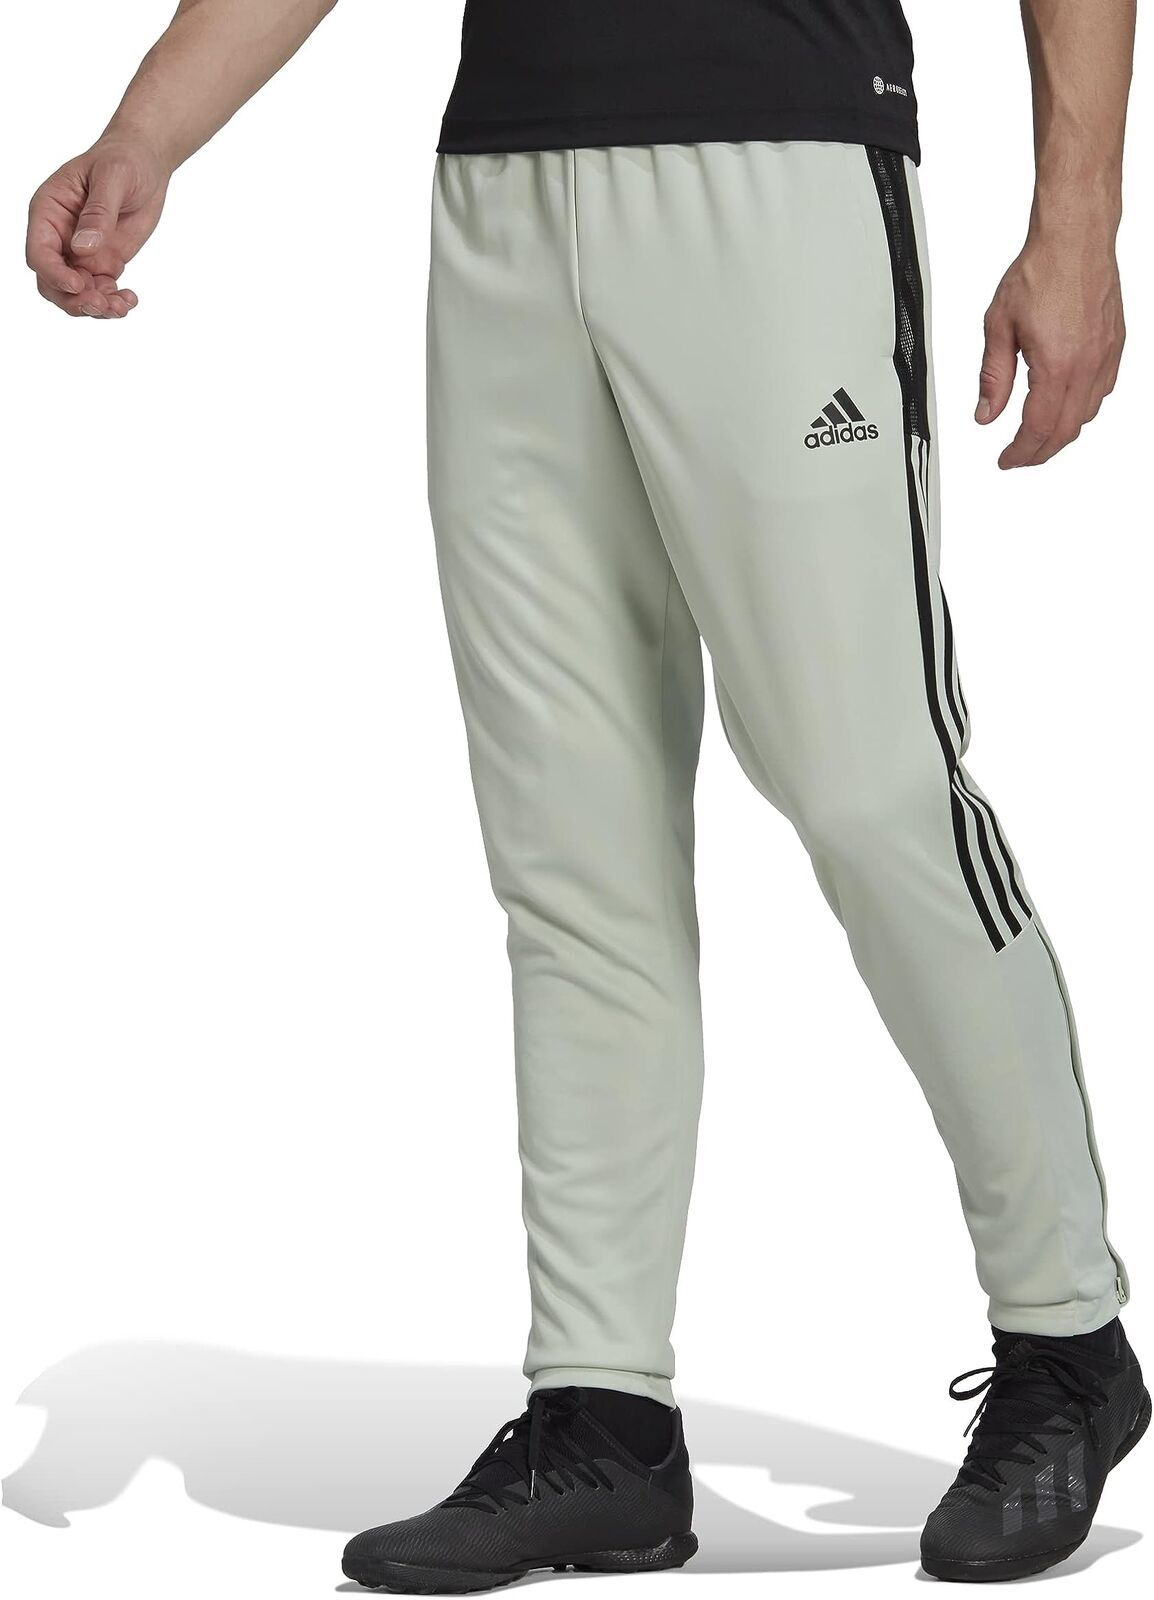 Primary image for adidas Mens Sportswear Tiro 21 Track Pants Size XXX-Large Color Light Green